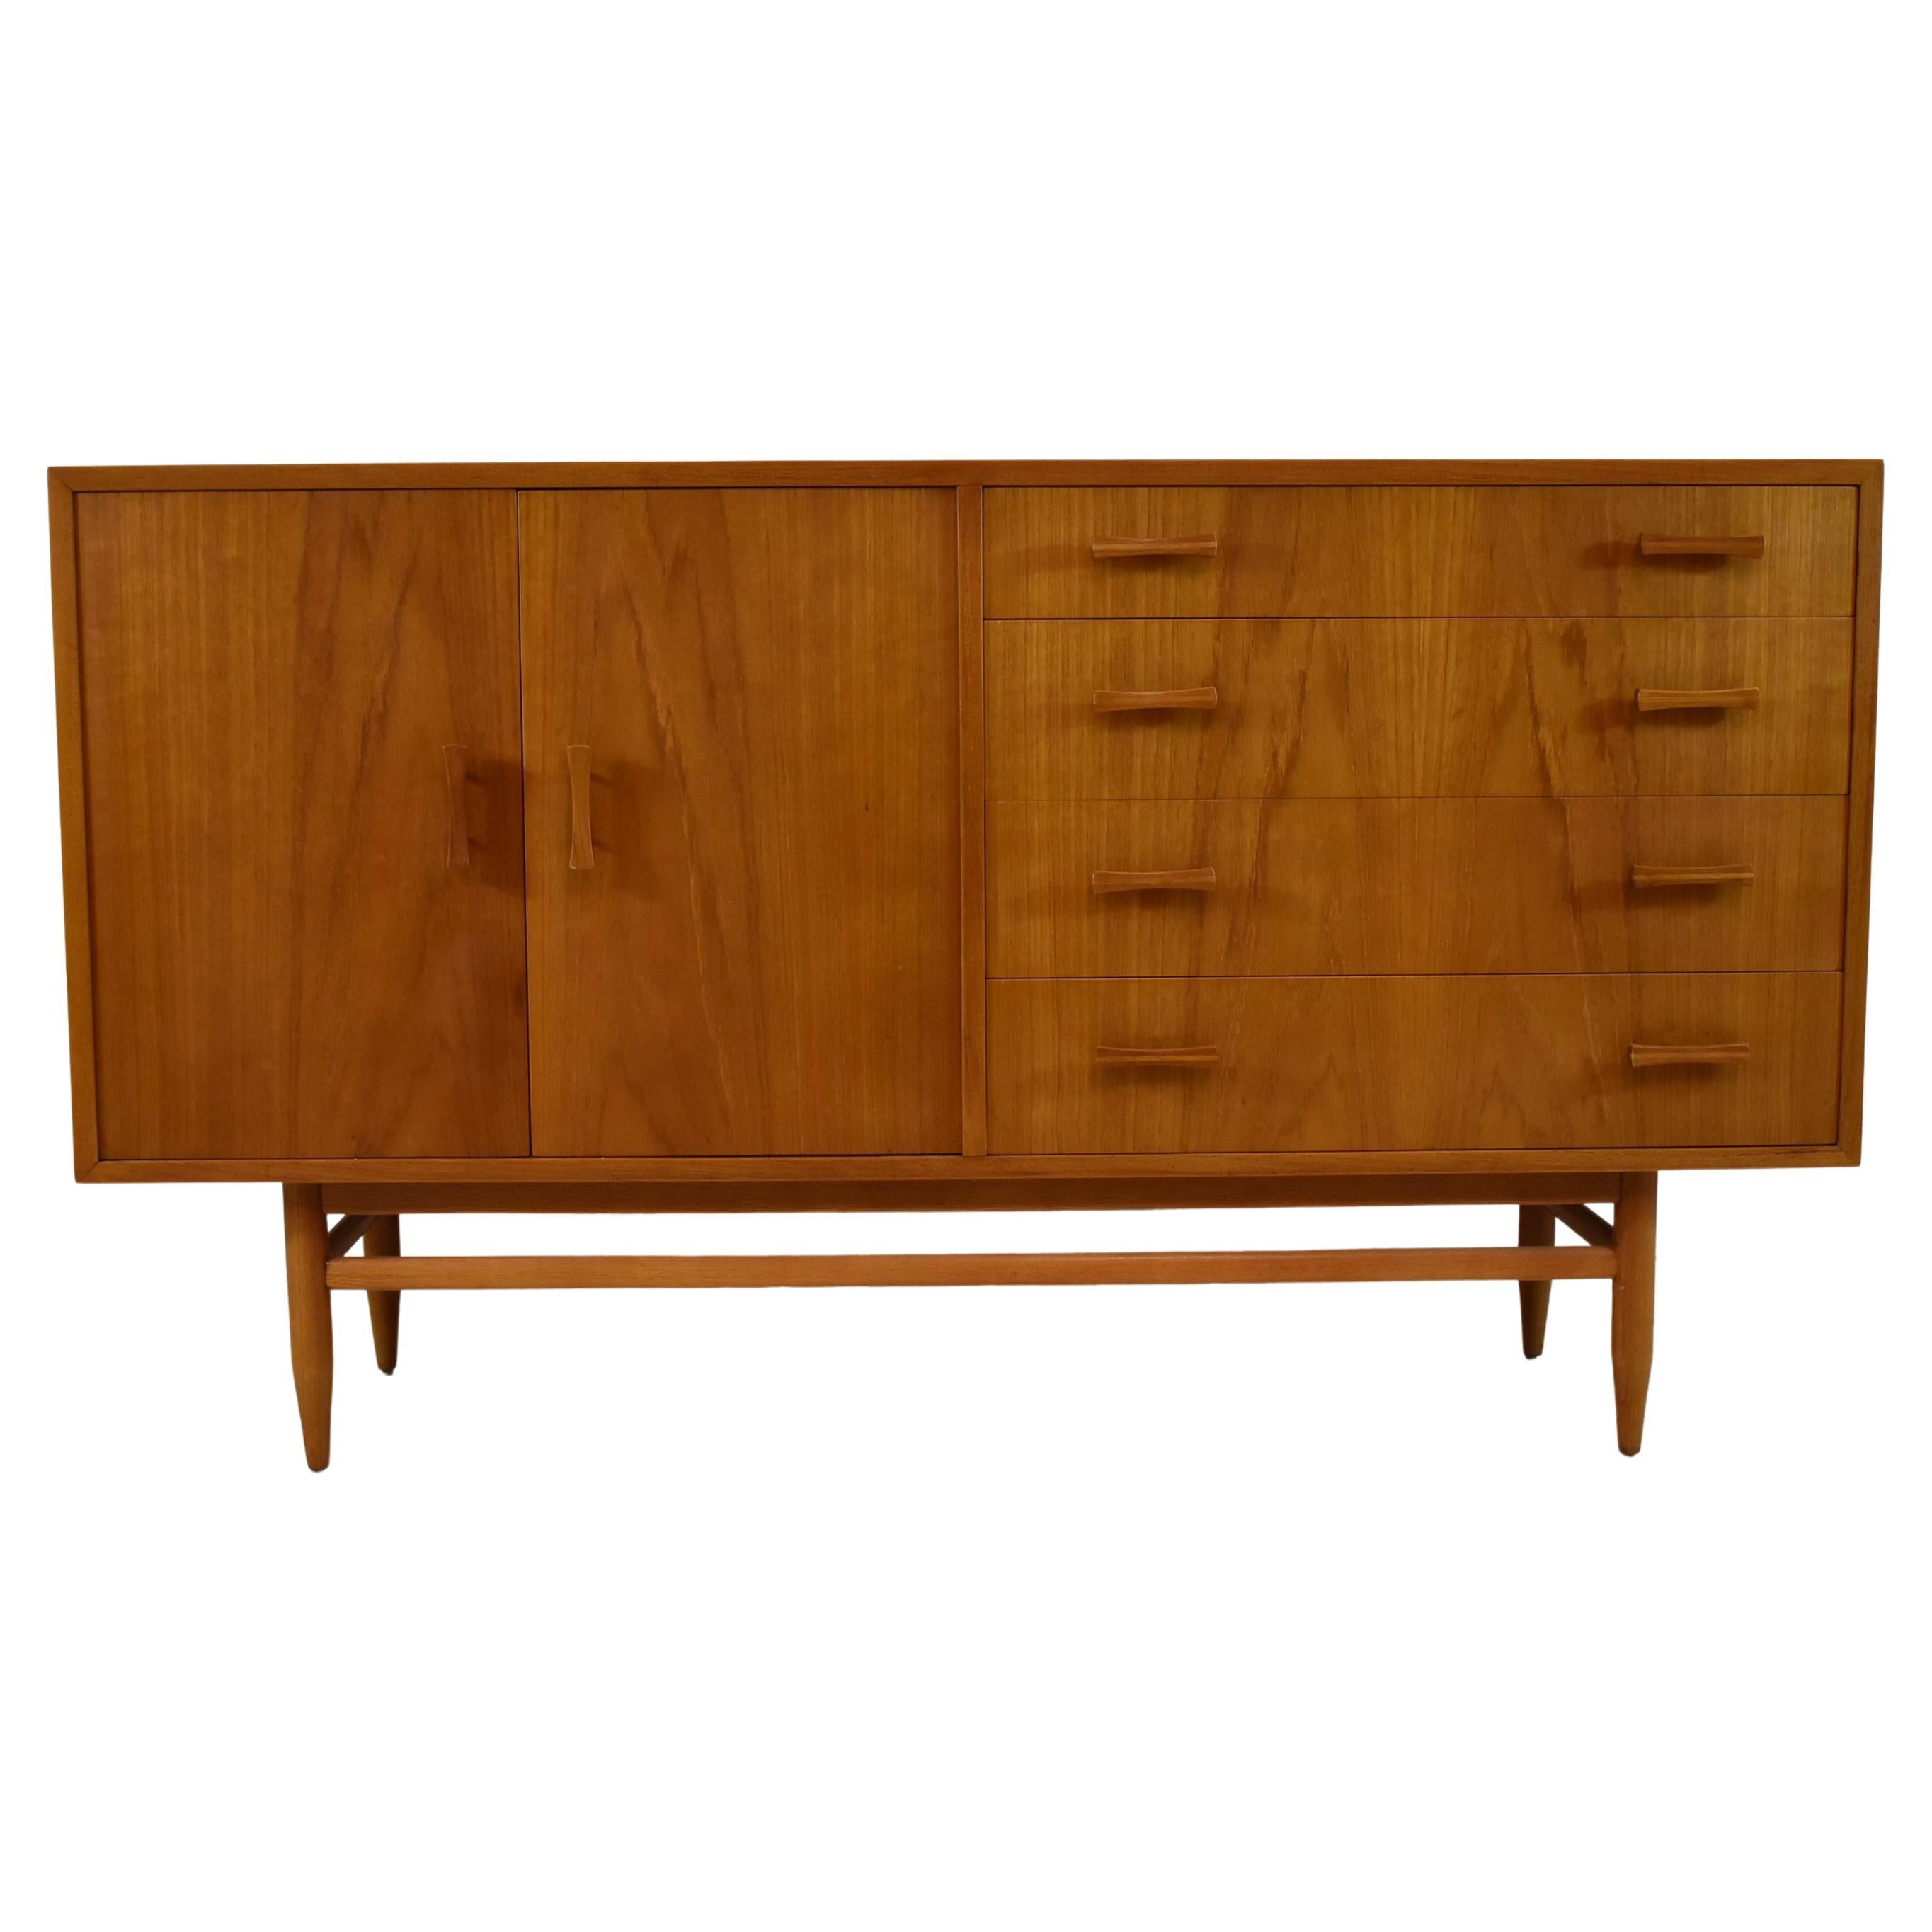 Paul McCobb Planner Group Style Teak Credenza with Bow Tie Handles